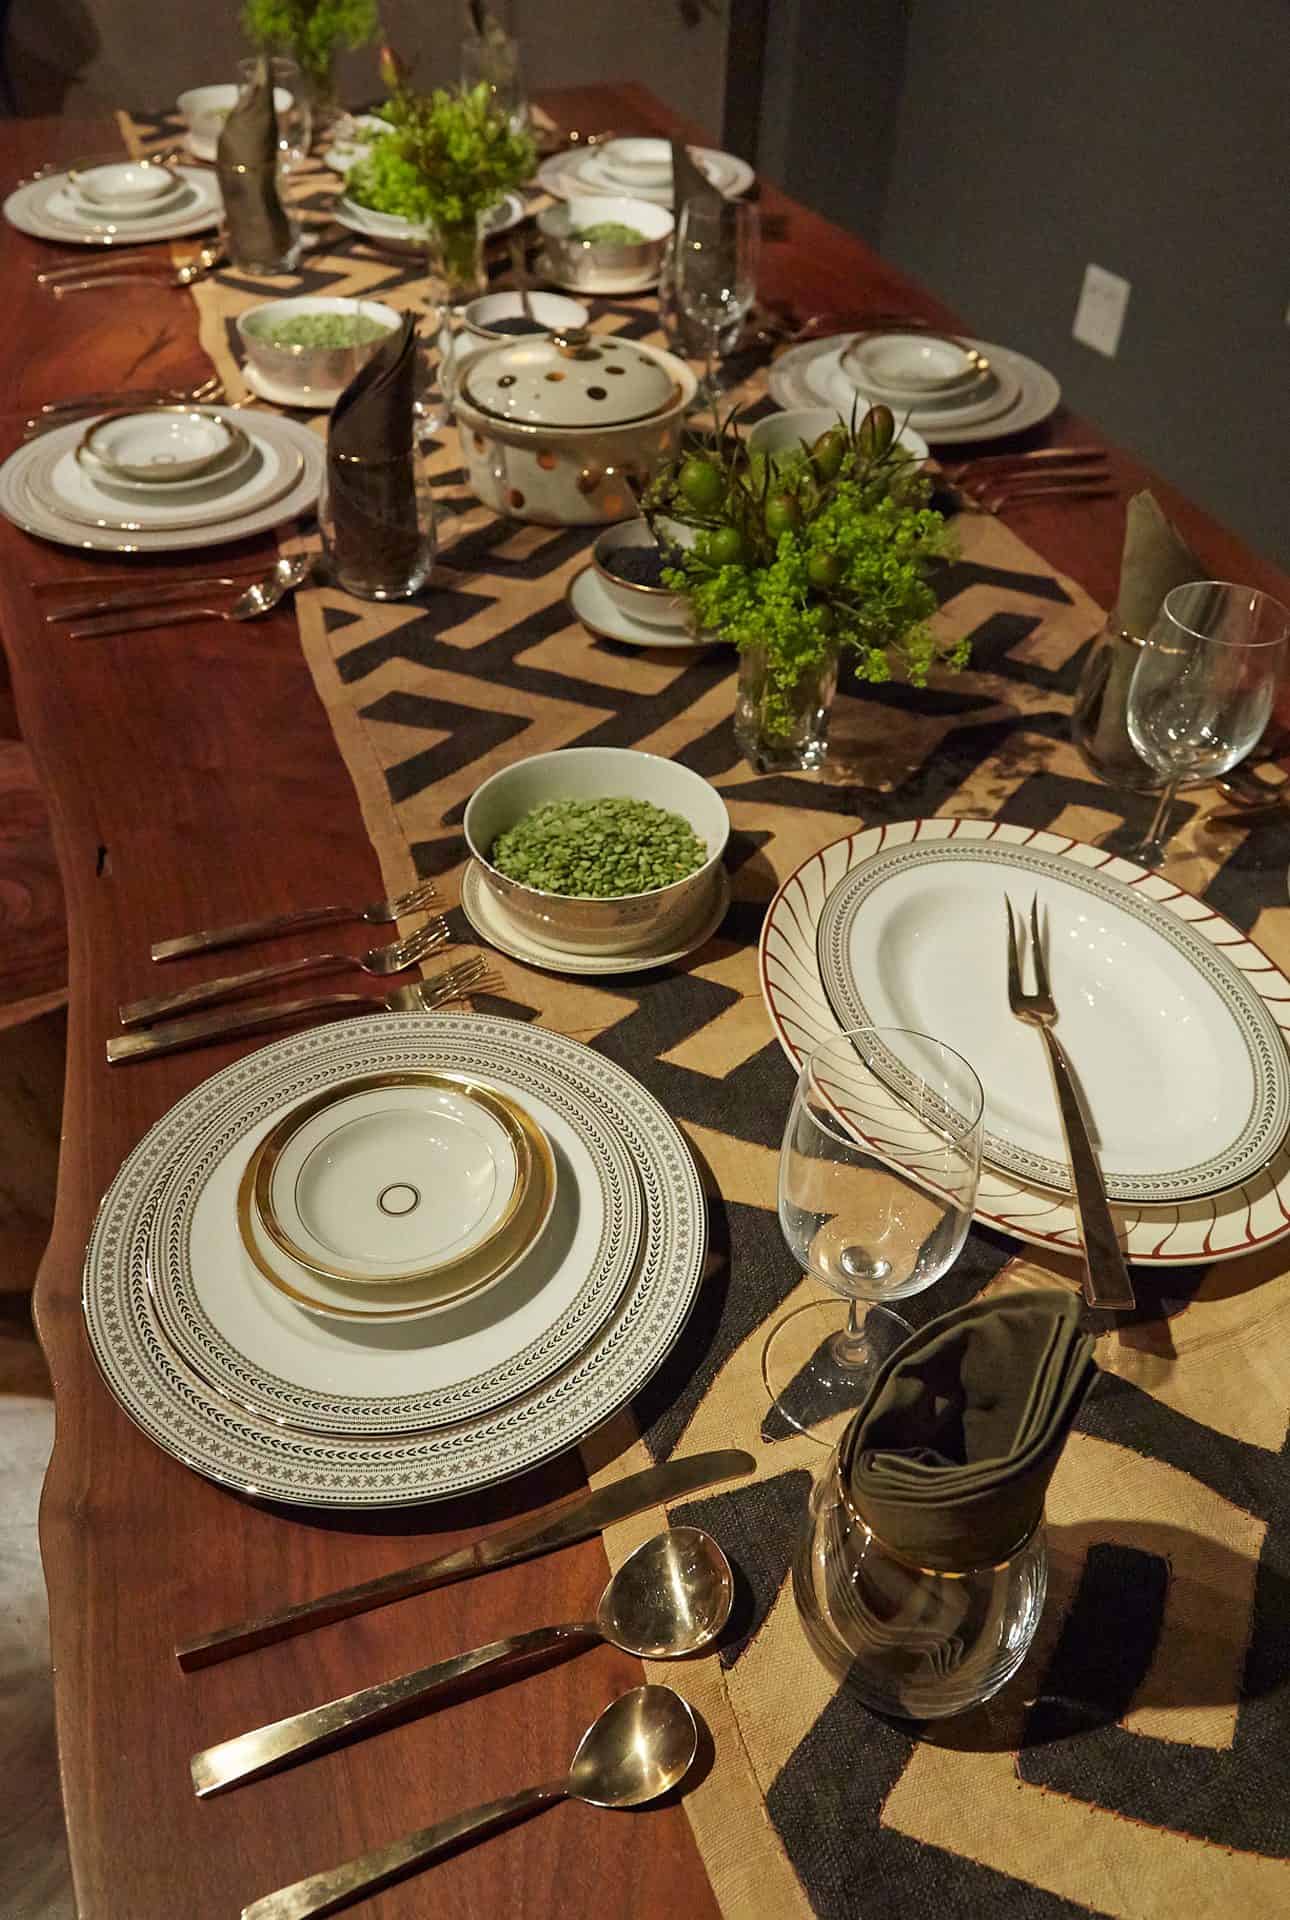 Tabletop design using a mix of black and gold plates and gold flatware on a live edge walnut dining table.